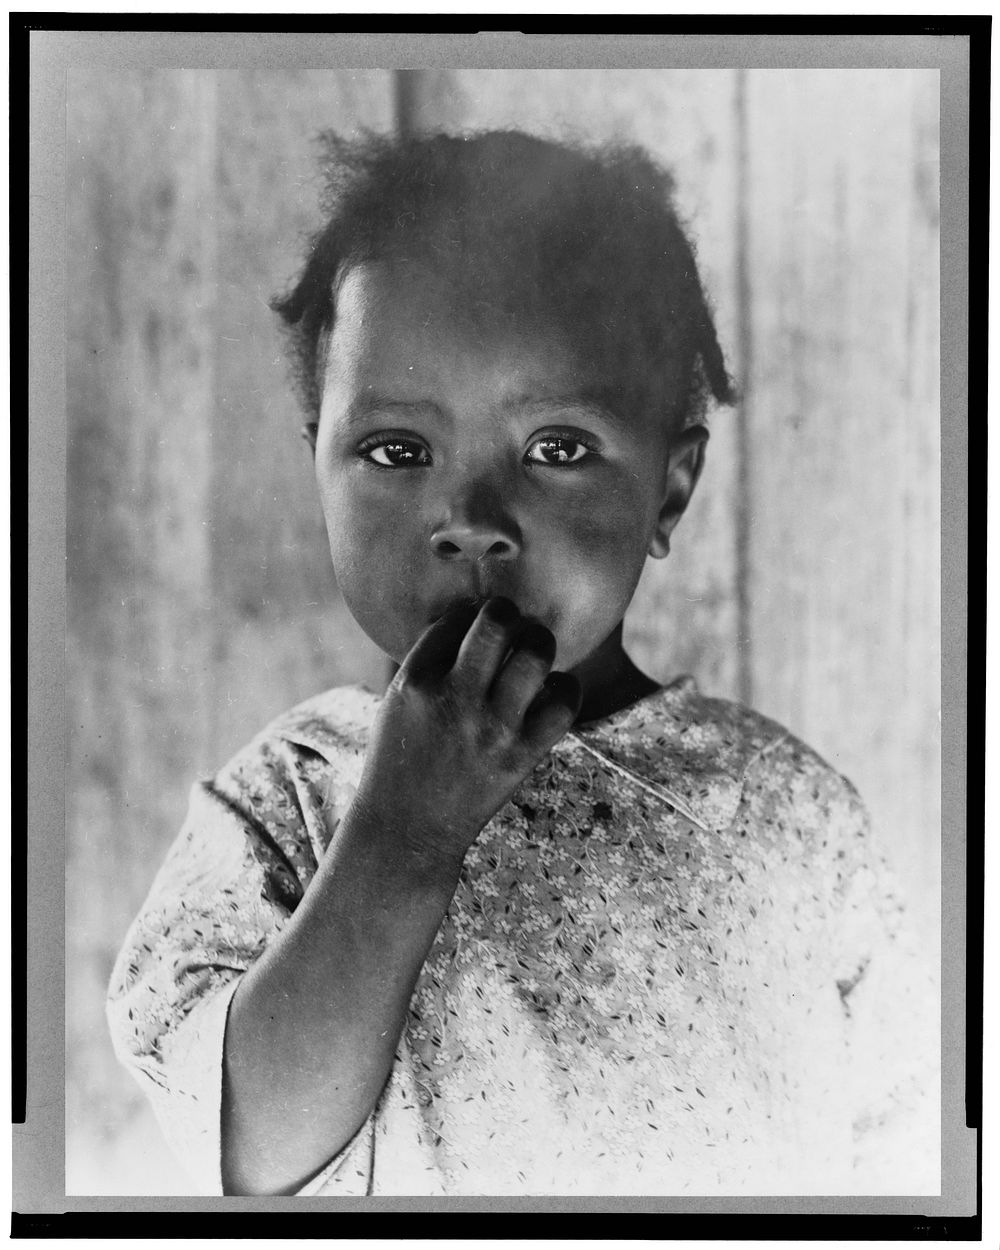 Child of former tenant farmer, now a day laborer. Ellis County, Texas by Dorothea Lange